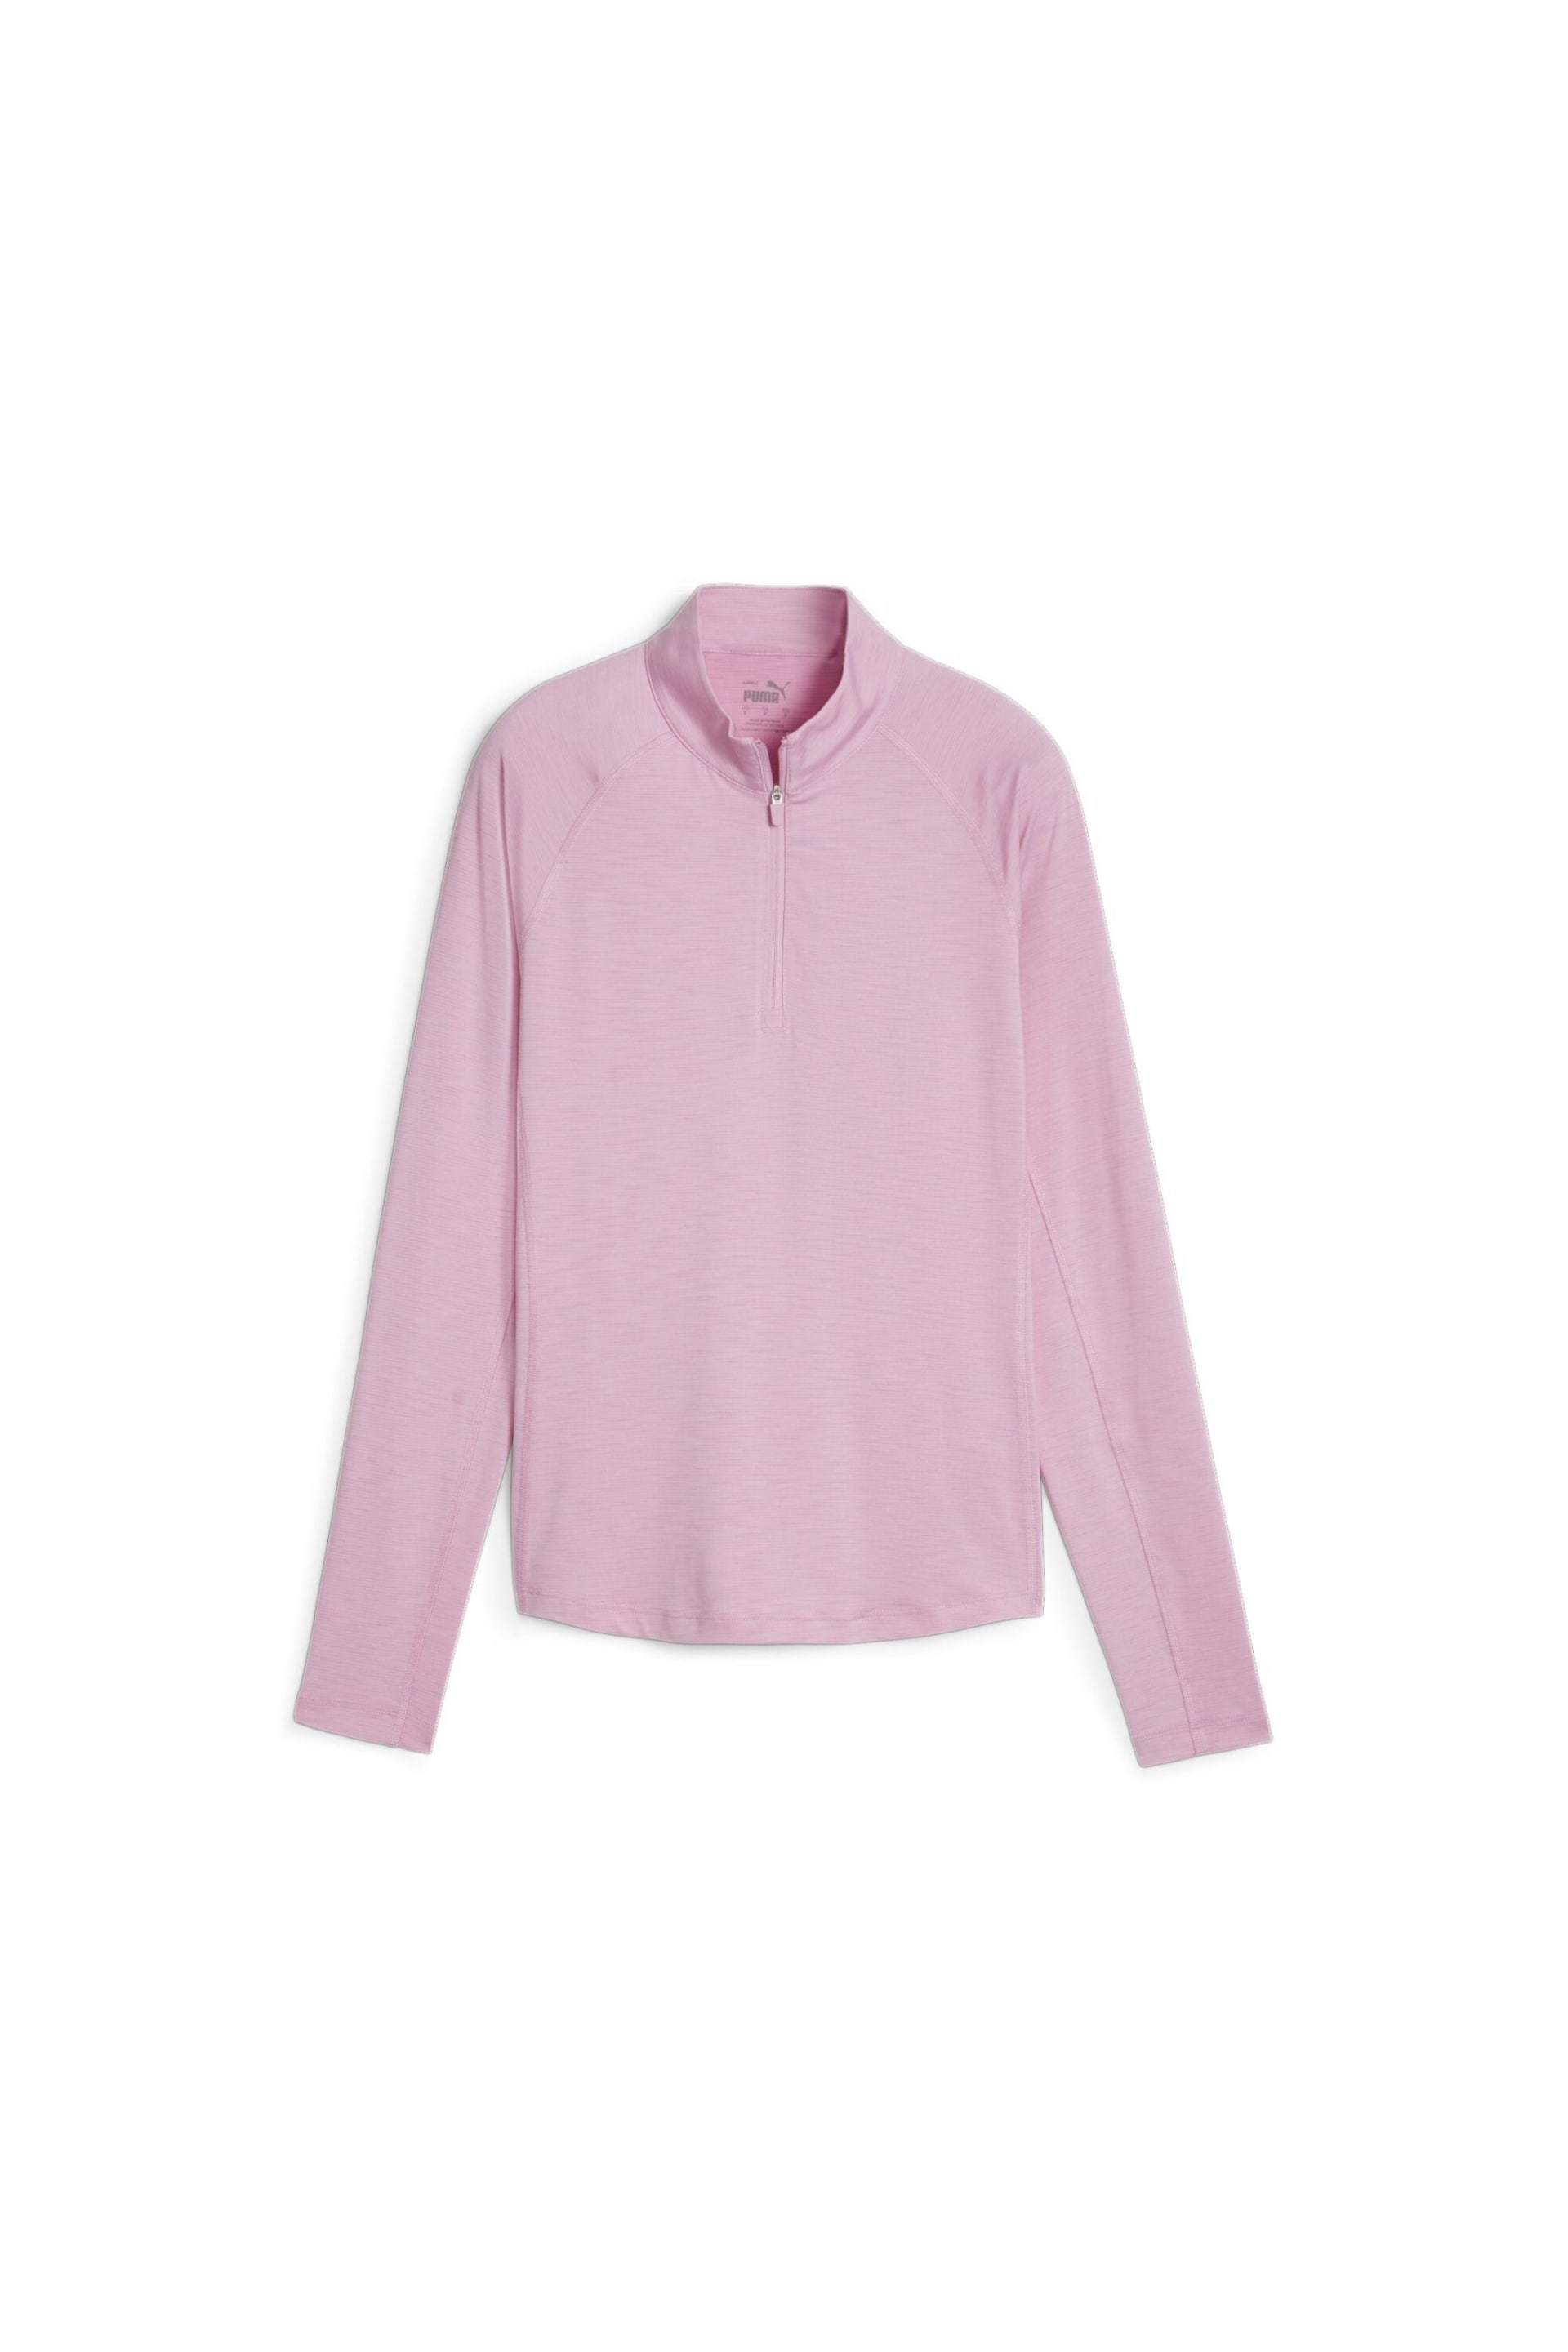 Puma Pink You-V Solid Womens Golf 1/4 Zip Pullover Jumper - Image 1 of 2